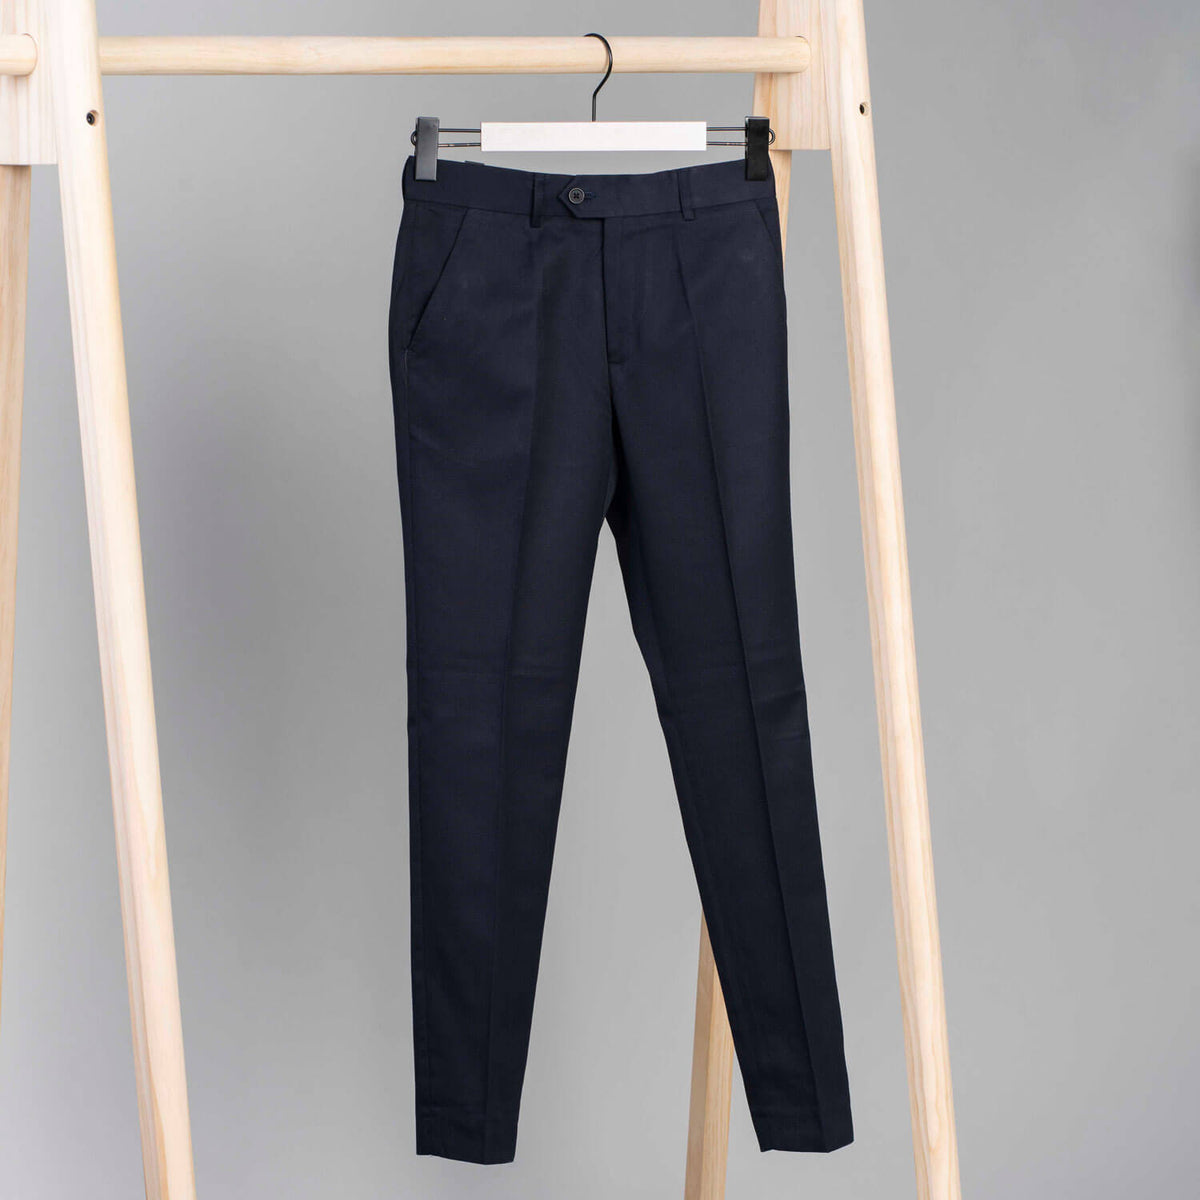 Lewis Youth Boys Trousers - Navy